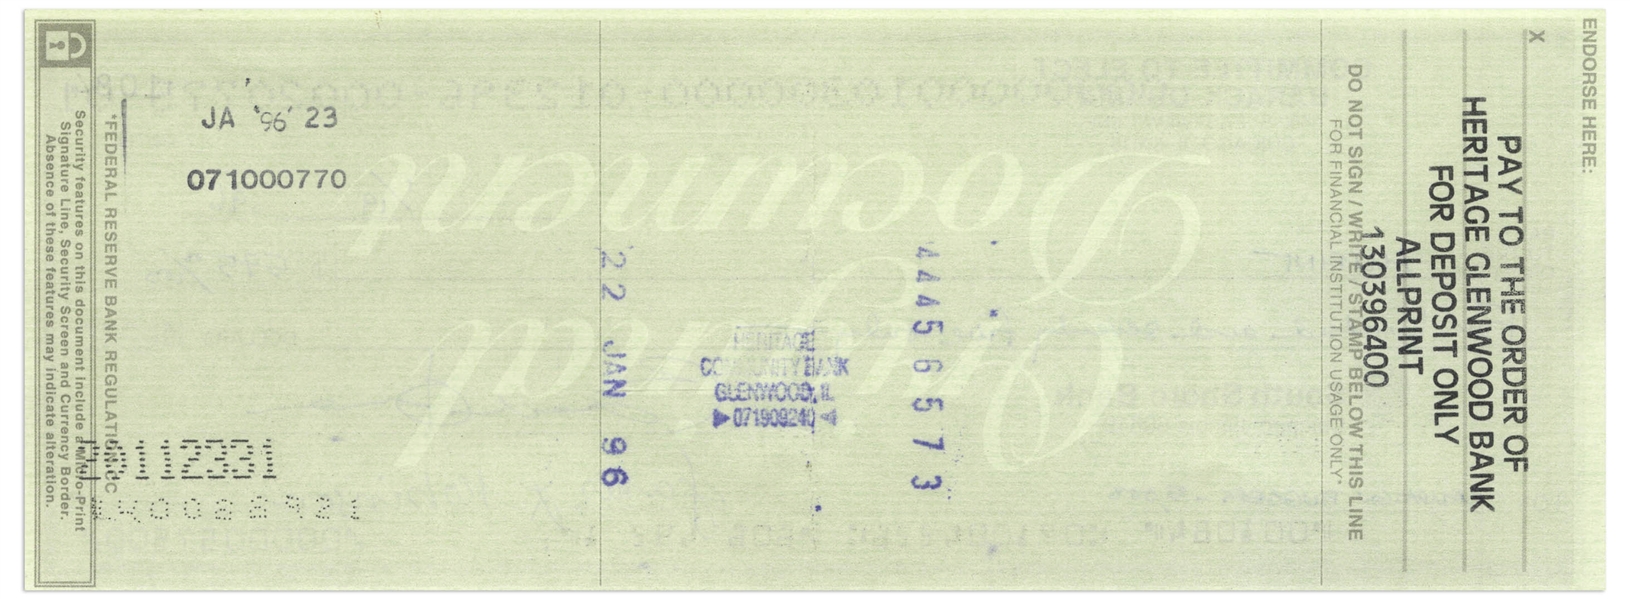 Scarce Check Handwritten and Signed by Barack Obama From the ''Committee to Elect Barack Obama'' Bank Account